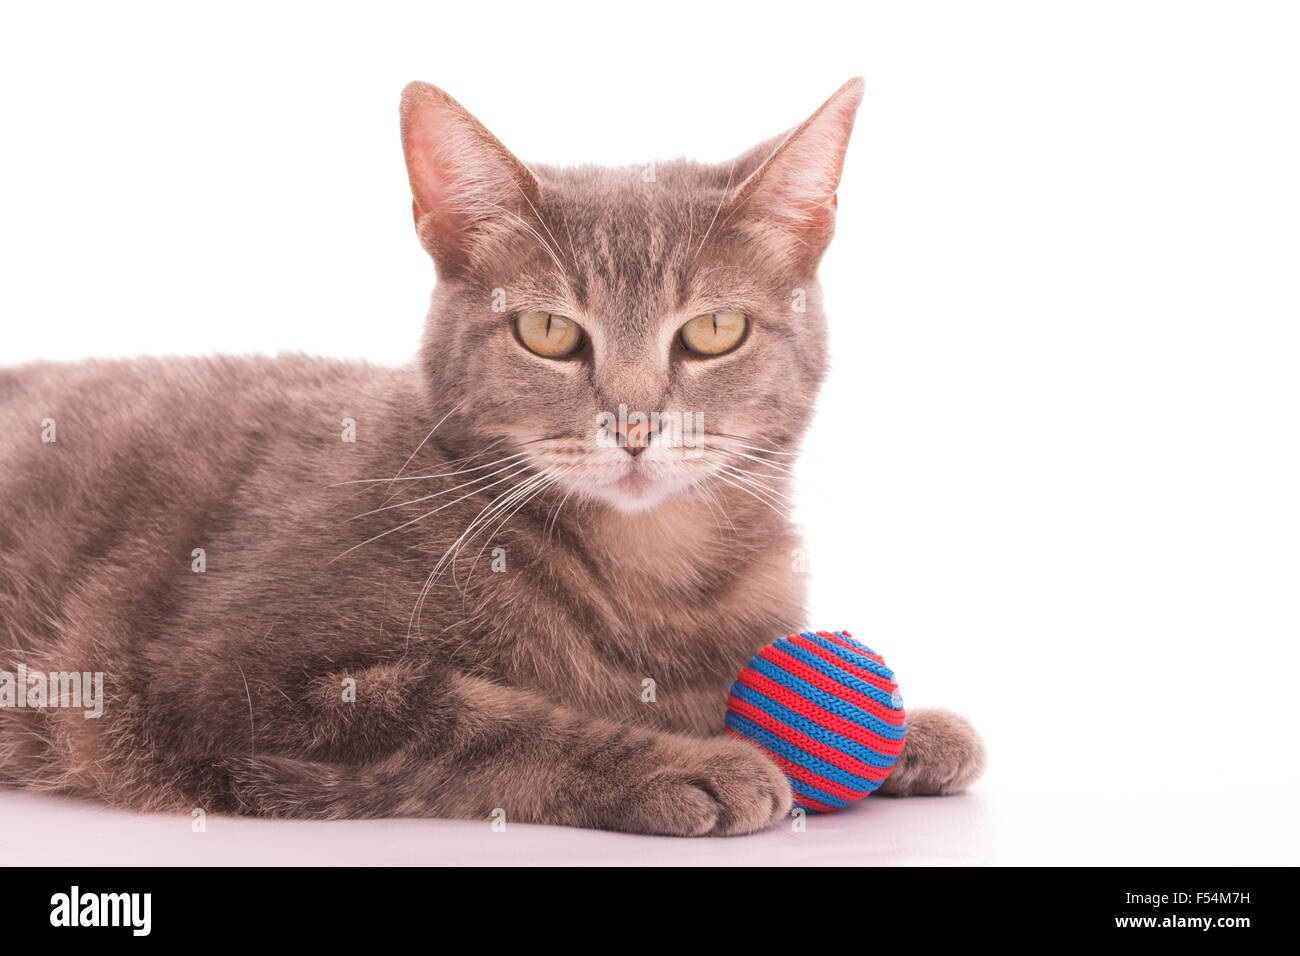 Blue tabby cat with a red and blue striped ball, on white Stock Photo